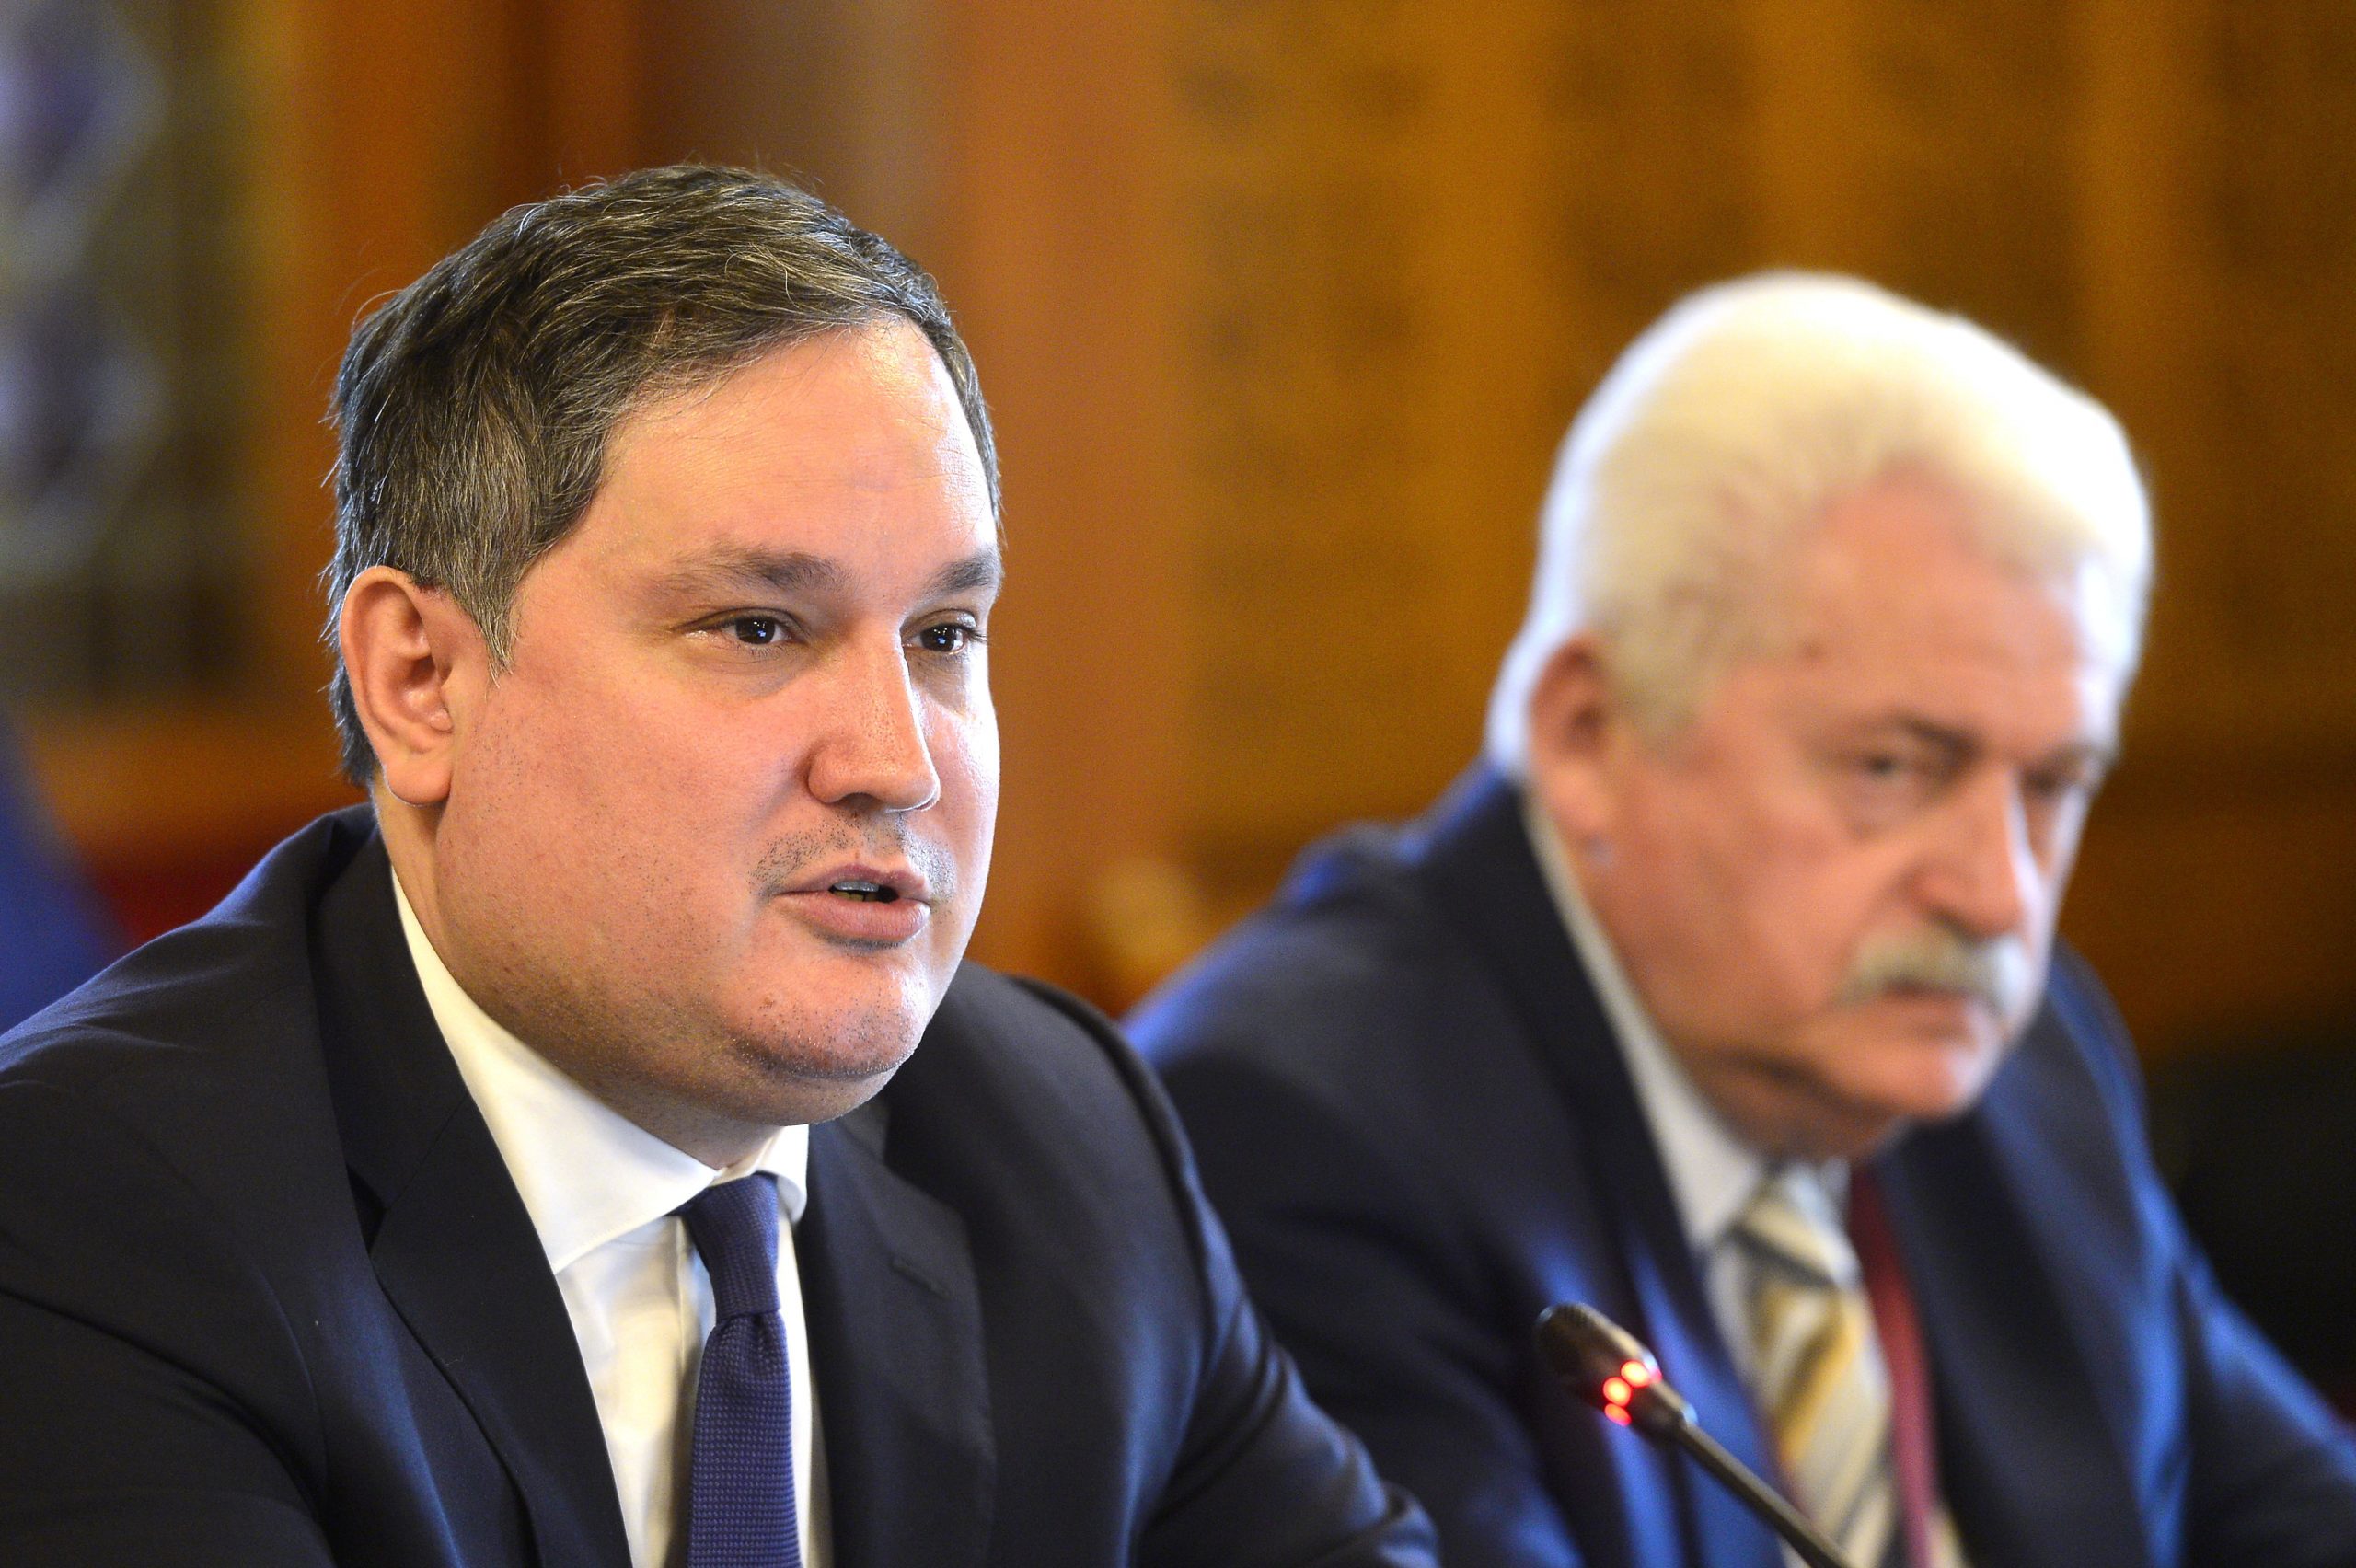 Incoming Min Nagy: Hungary Could Reach EU's Average Development Level by 2030